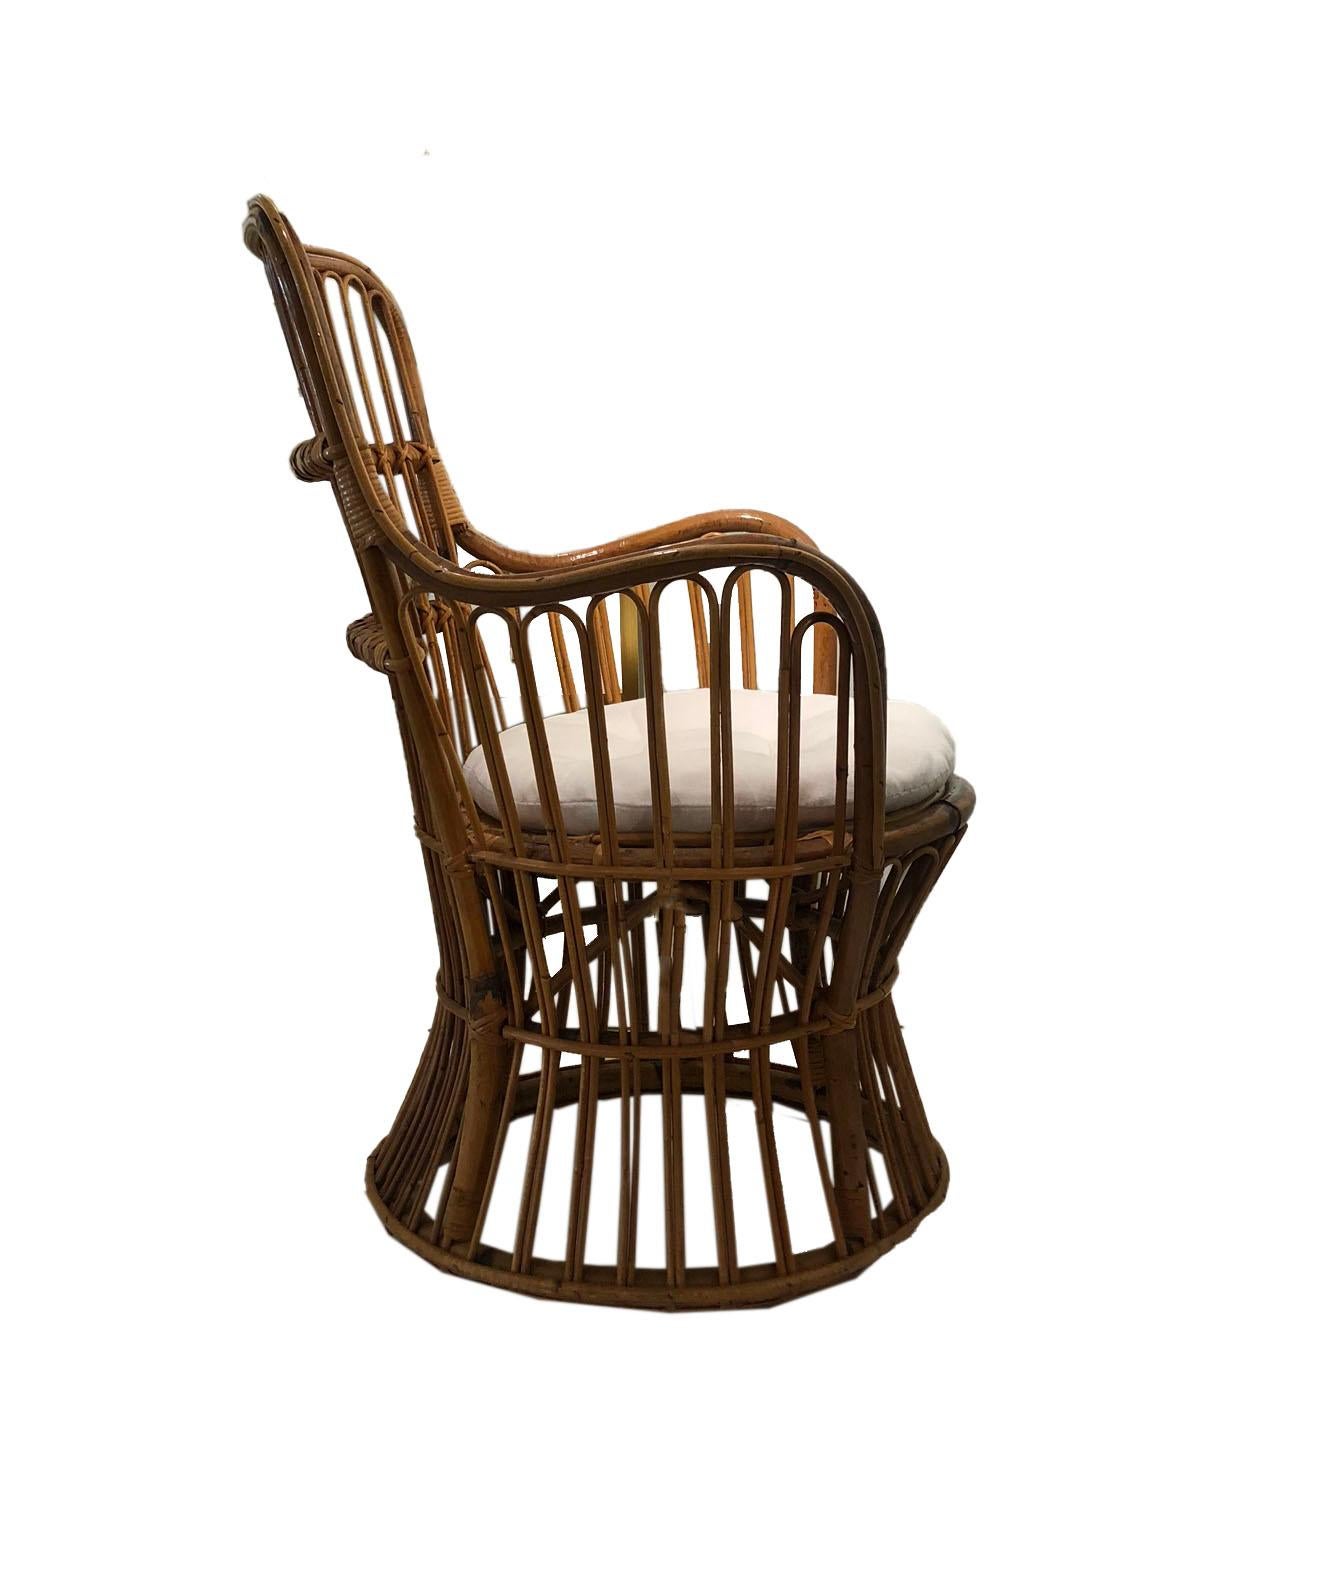 This medium scale rattan chair is a perfect example of its midcentury beginnings. A comfortable seat and new upholstery allow this chair to mix with many styles and become a comfortable place to sit in your home!